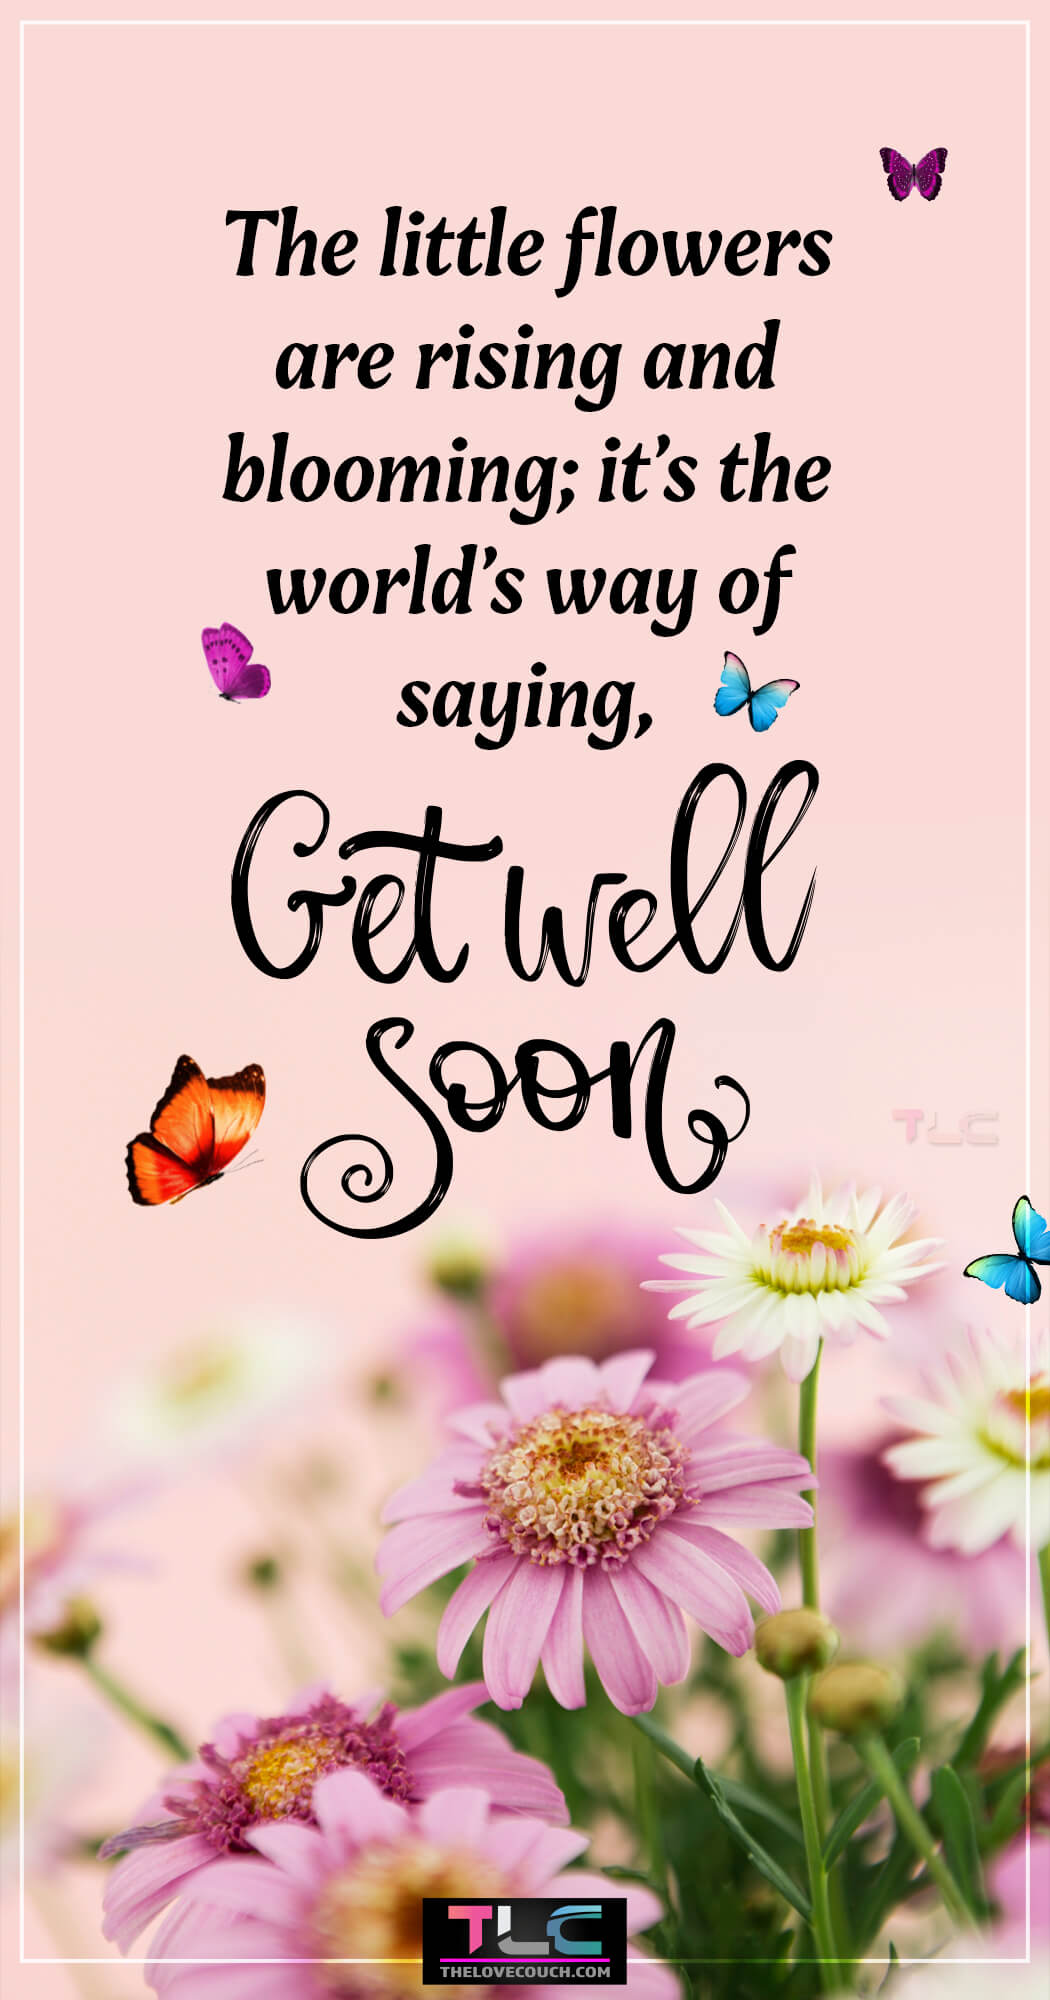 Quick Recovery Quotes - The little flowers are rising and blooming; it’s the world’s way of saying, get well soon.